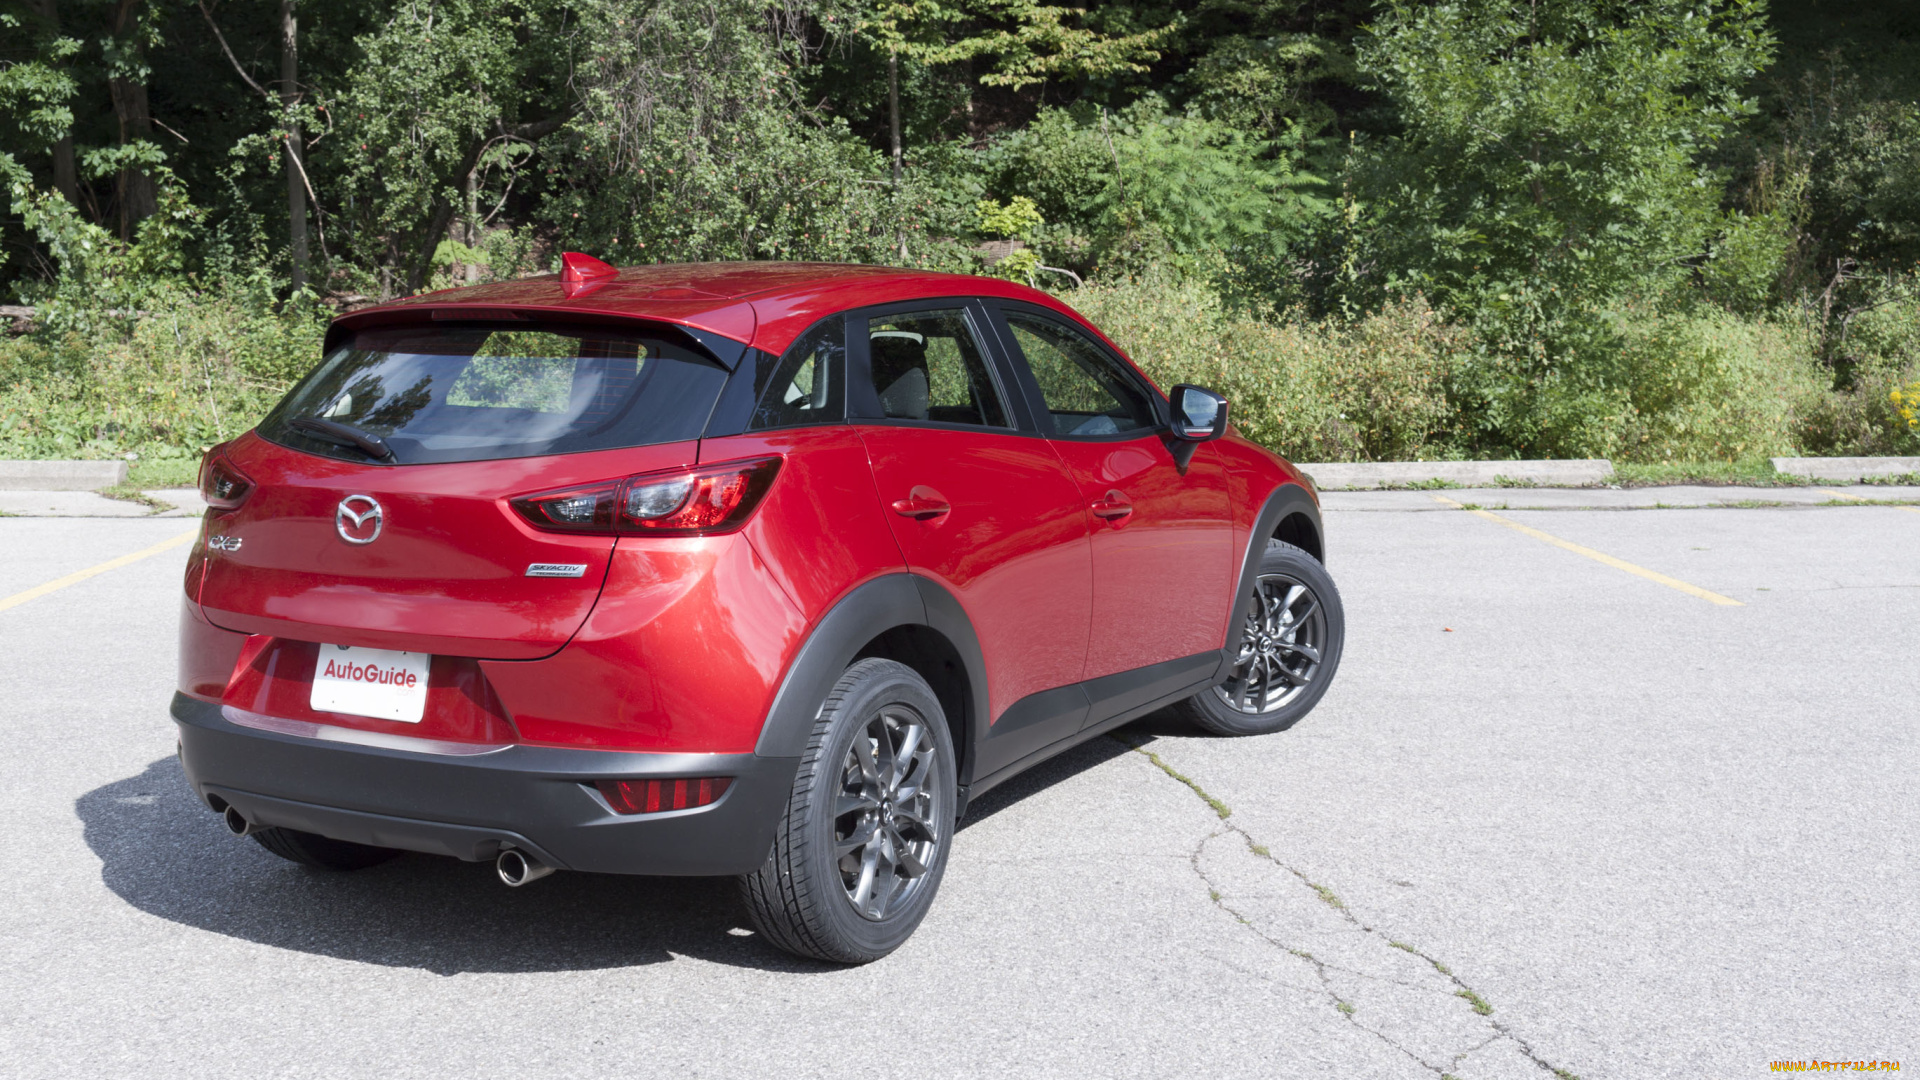 mazda, cx-3, review, subcompact, crossover, 2018, автомобили, mazda, subcompact, 2018, review, cx-3, crossover, red